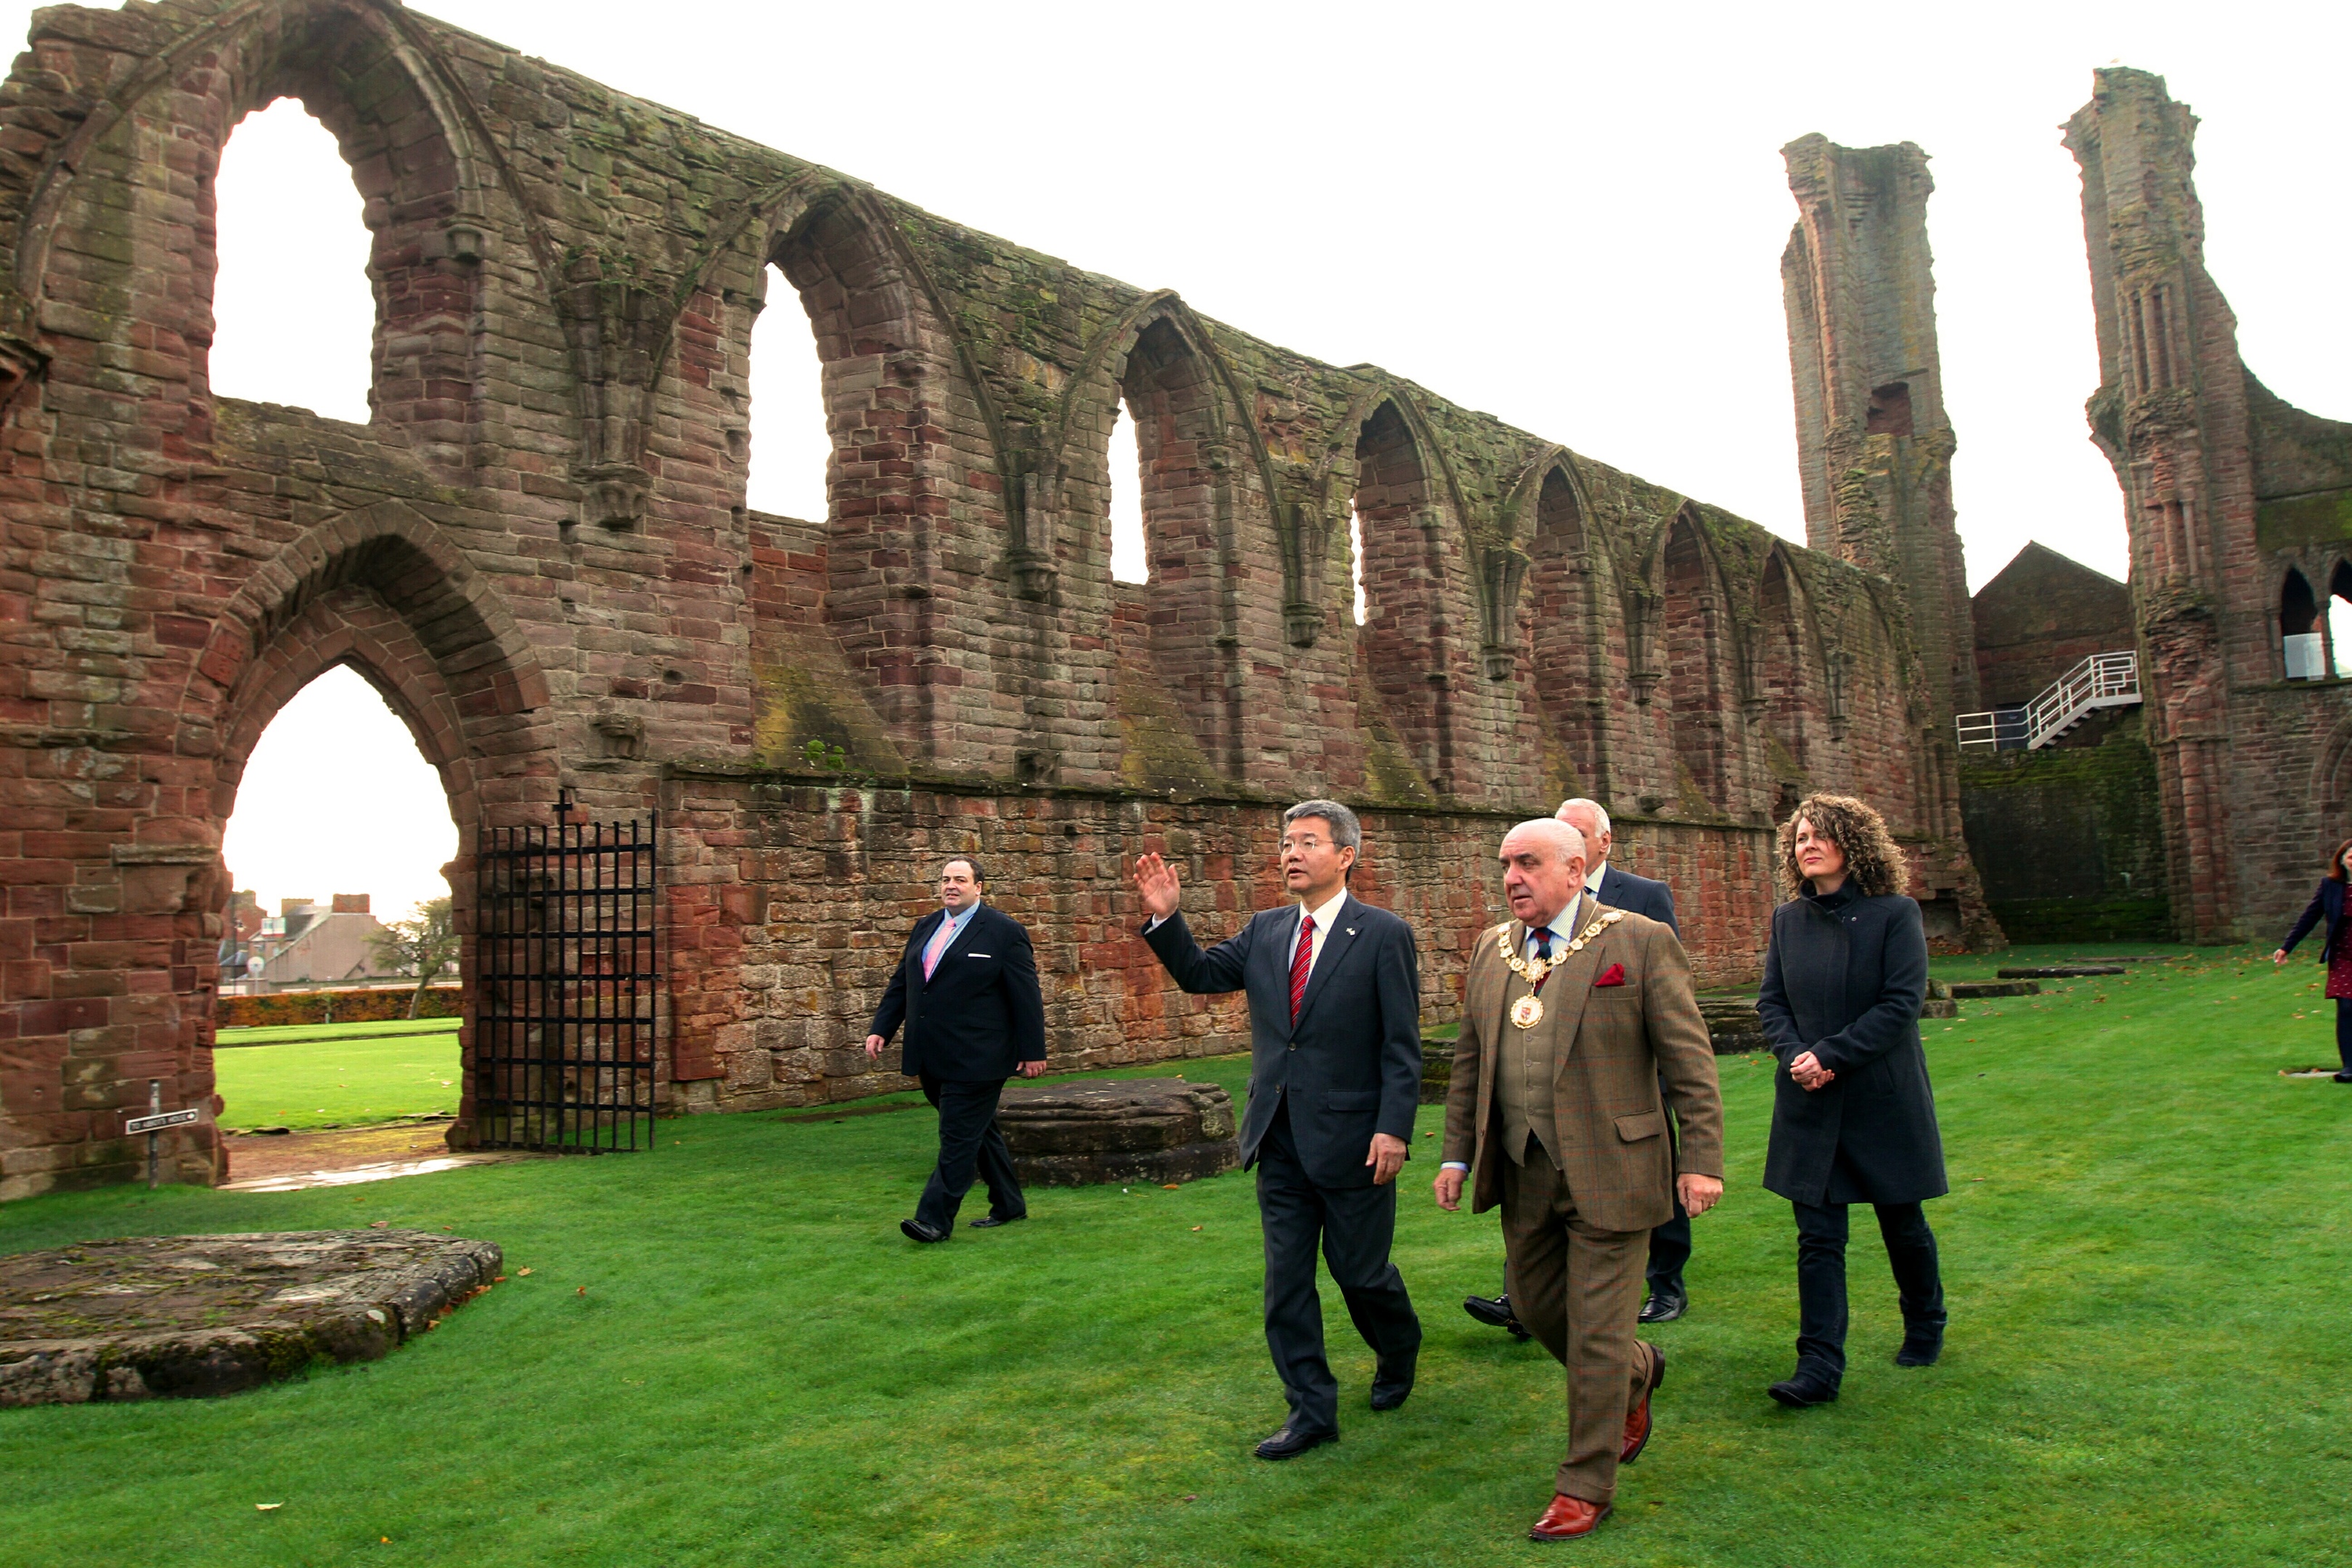 Courier Arbroath News- Japanese Consul General Daisuke Matsunaga visits Arbroath Abbey,picture shows; with Provost Proctor & steward Andrew Kennedy,dressed as a Benedictine Monk, who was showing them around,tuesday 14th november.